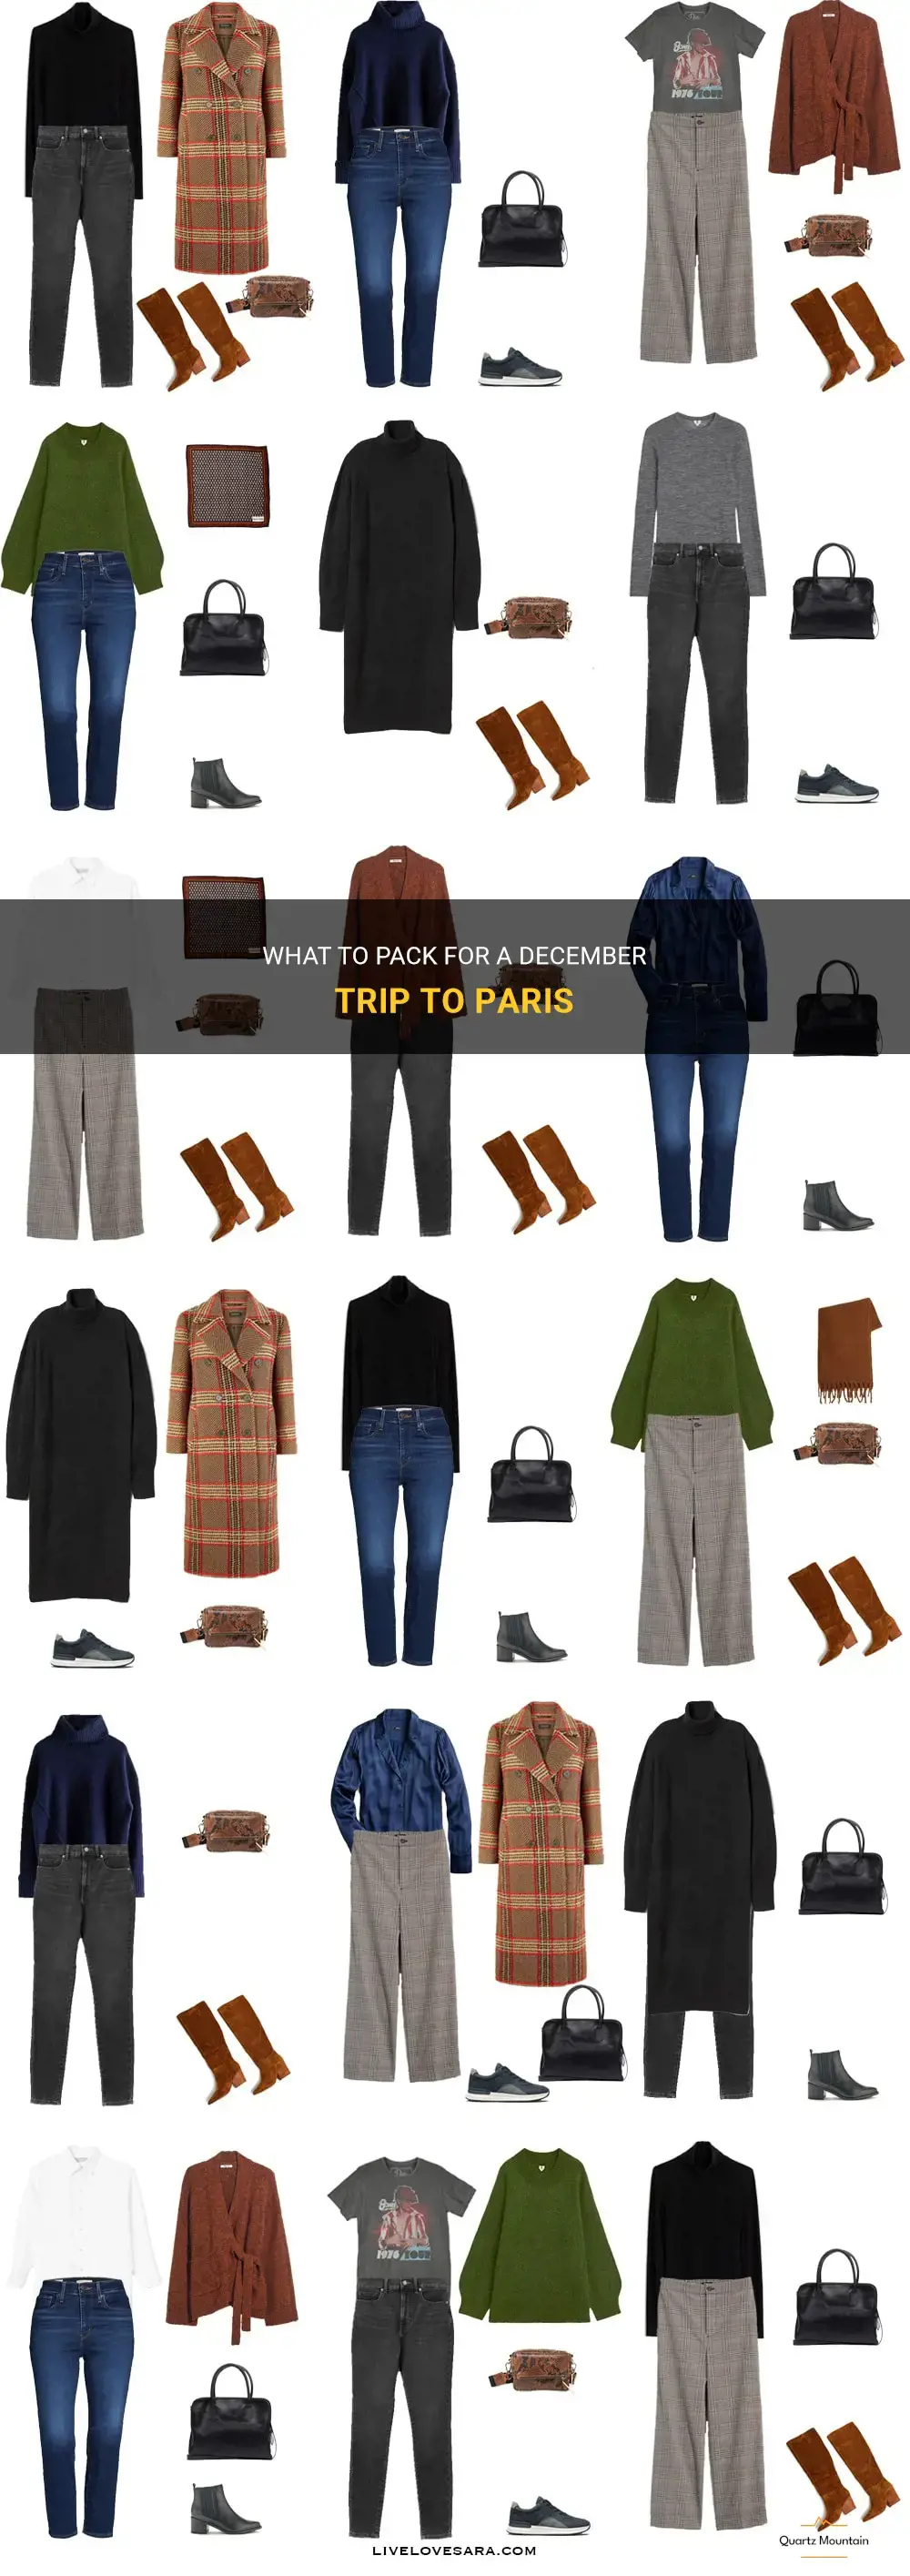 december in paris what to pack